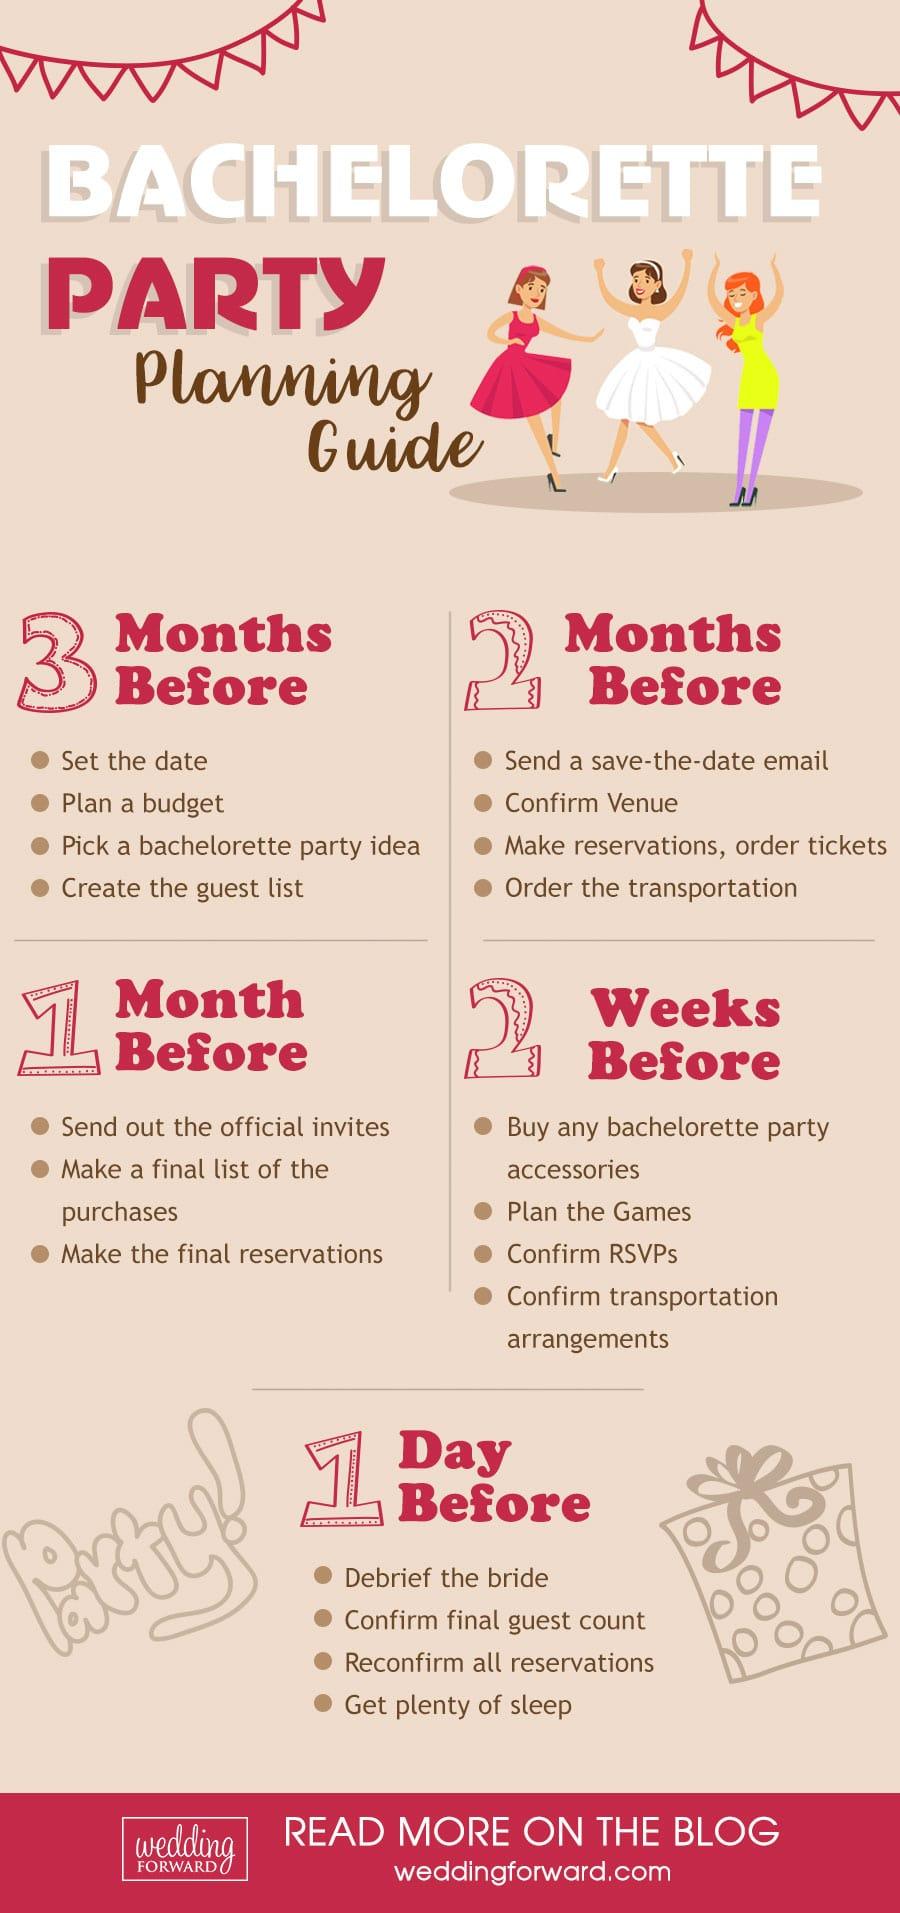 infographic bachelorette party planning guide 3 months before